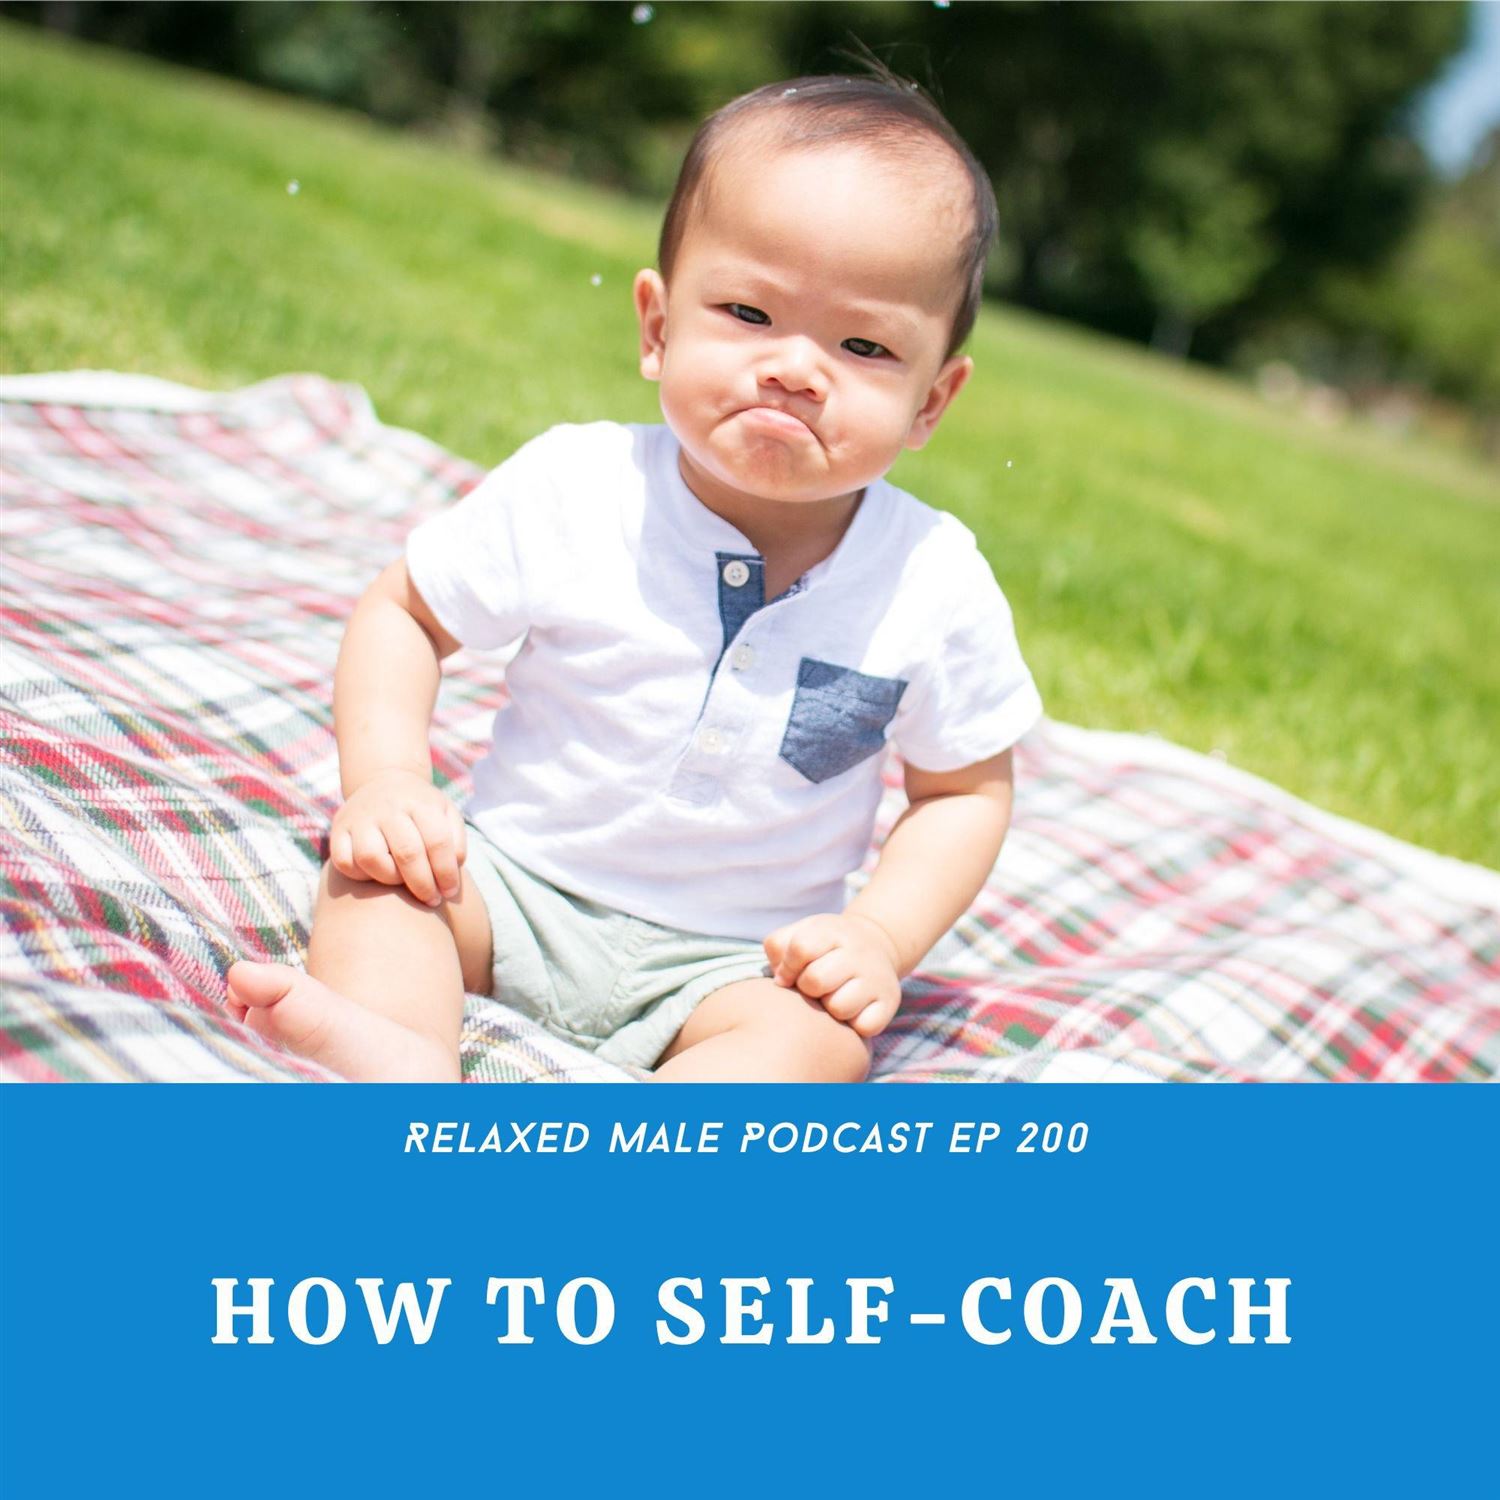 How To Self-coach